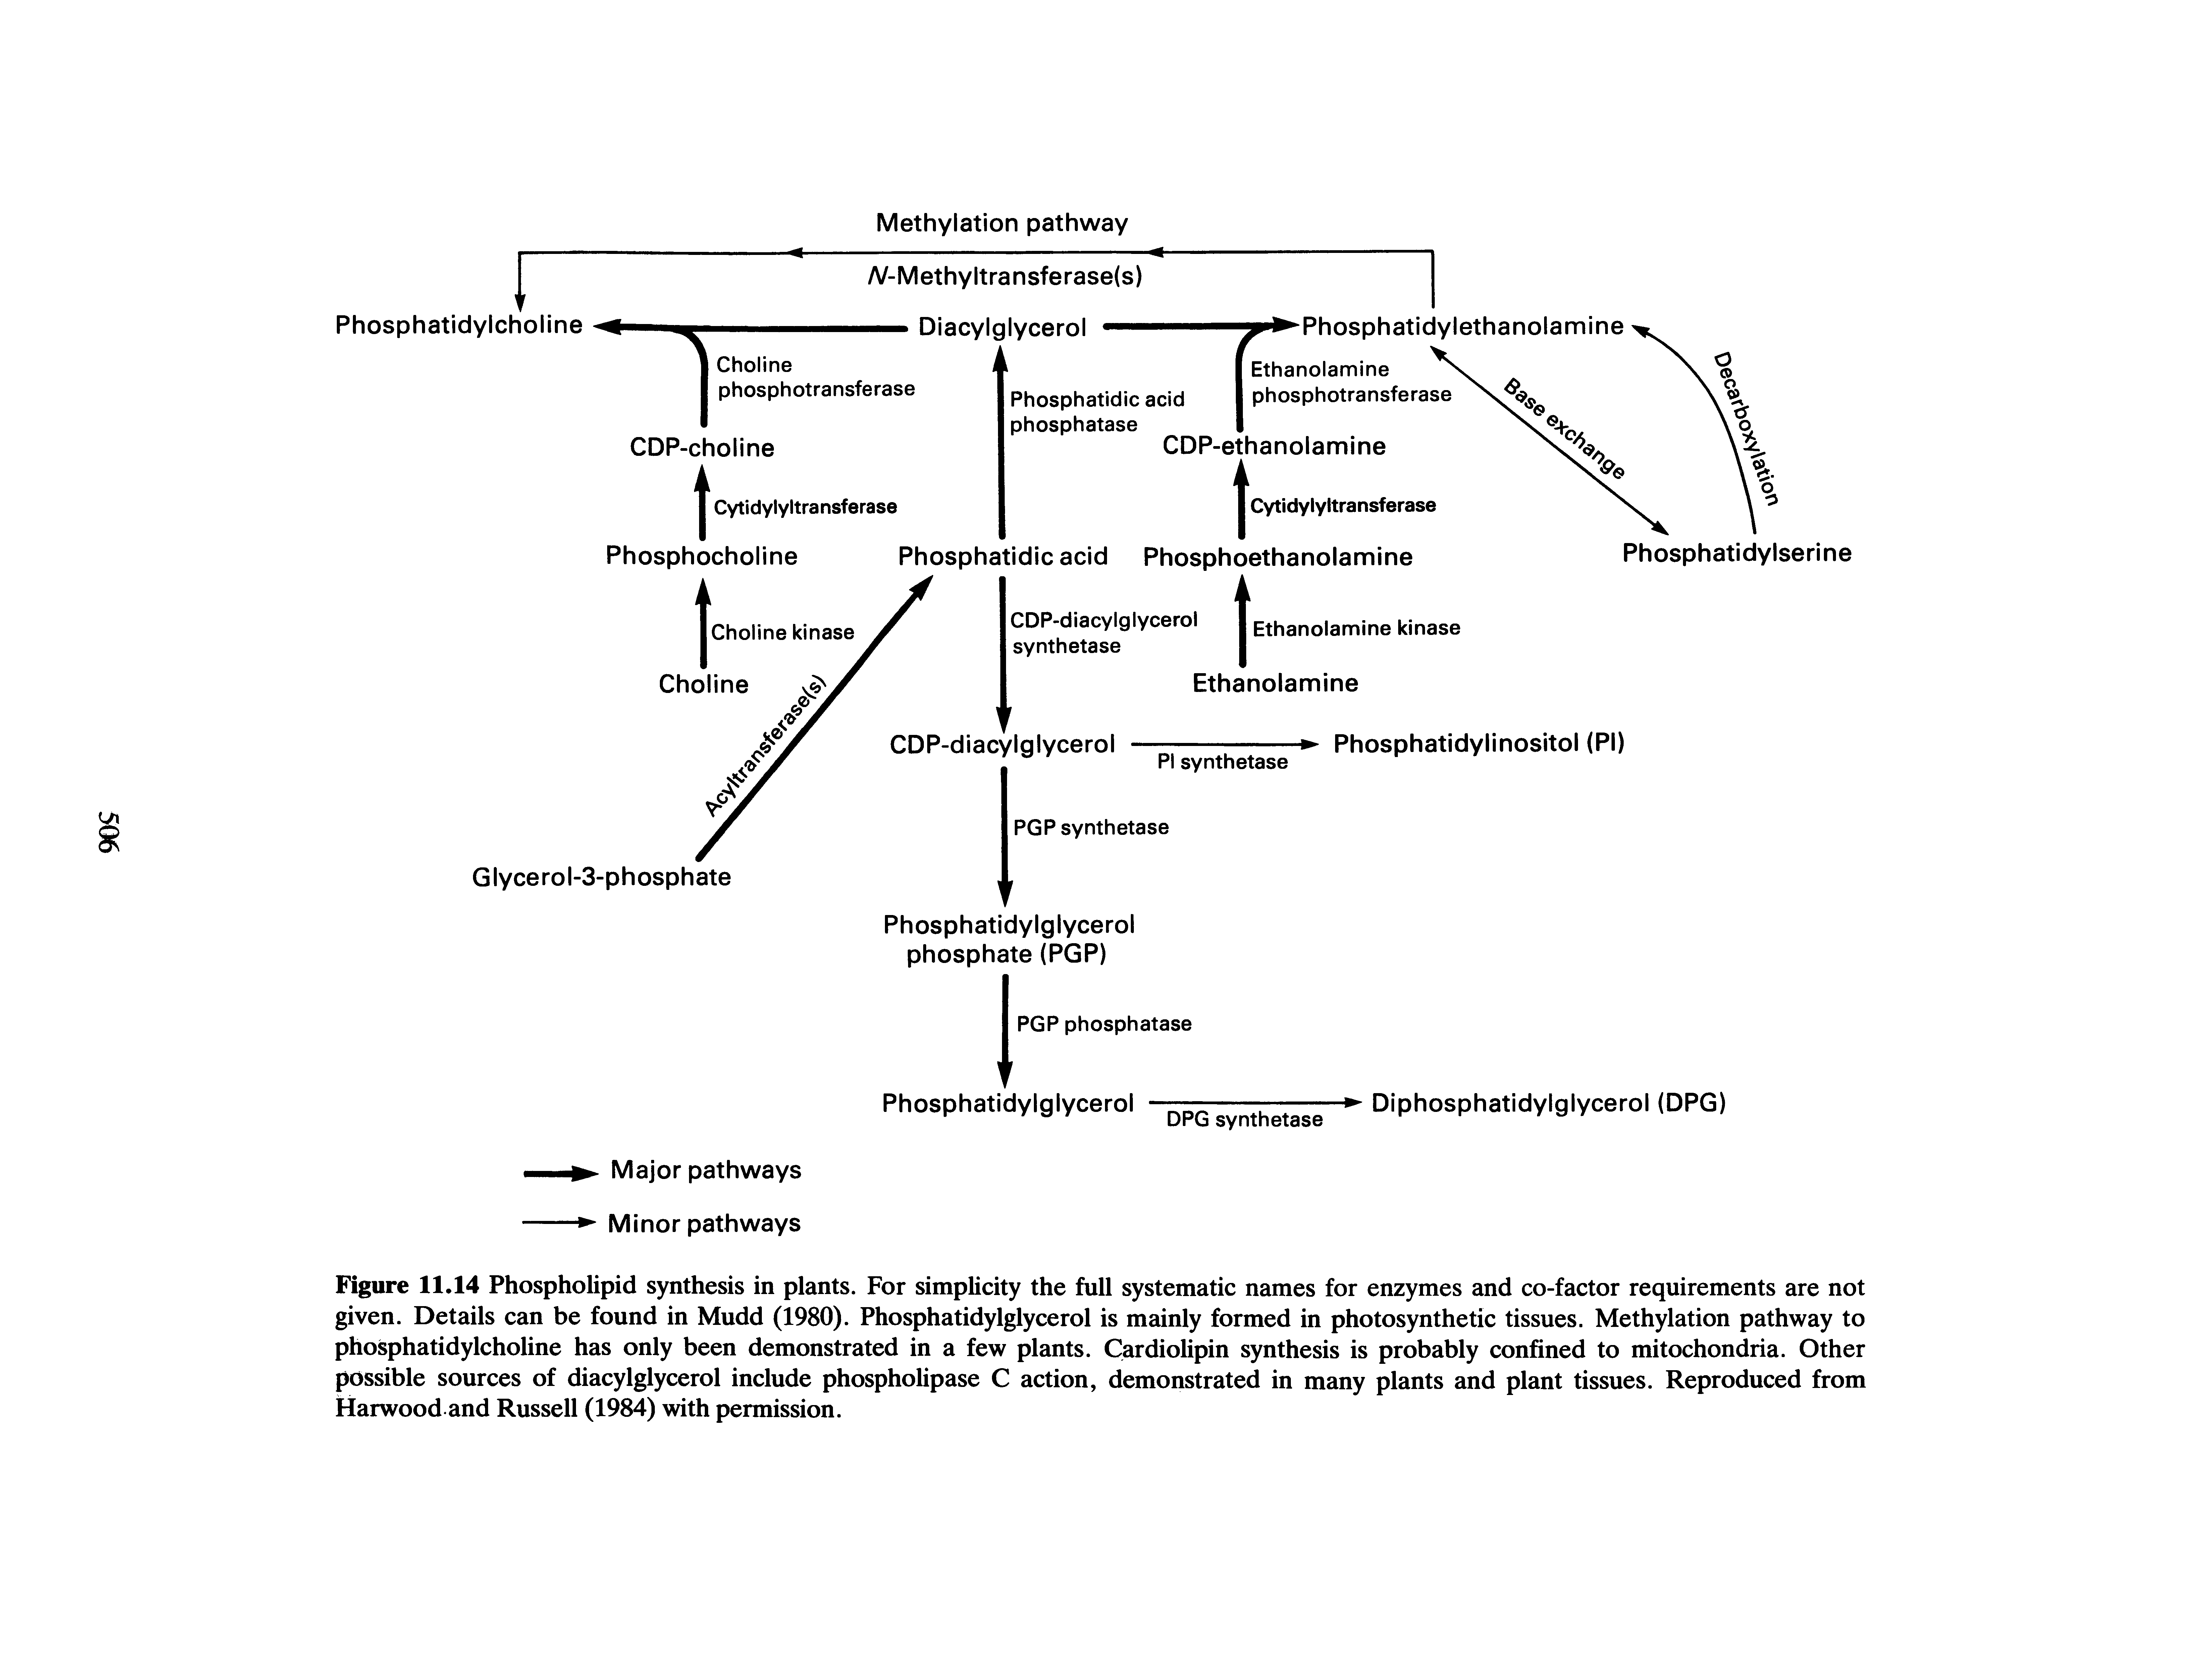 Figure 11.14 Phospholipid synthesis in plants. For simplicity the full systematic names for enzymes and co-factor requirements are not given. Details can be found in Mudd (1980). Phosphatidylglycerol is mainly formed in photosynthetic tissues. Methylation pathway to phosphatidylcholine has only been demonstrated in a few plants. Cardiolipin synthesis is probably confined to mitochondria. Other possible sources of diacylglycerol include phospholipase C action, demonstrated in many plants and plant tissues. Reproduced from Harwood and Russell (1984) with permission.